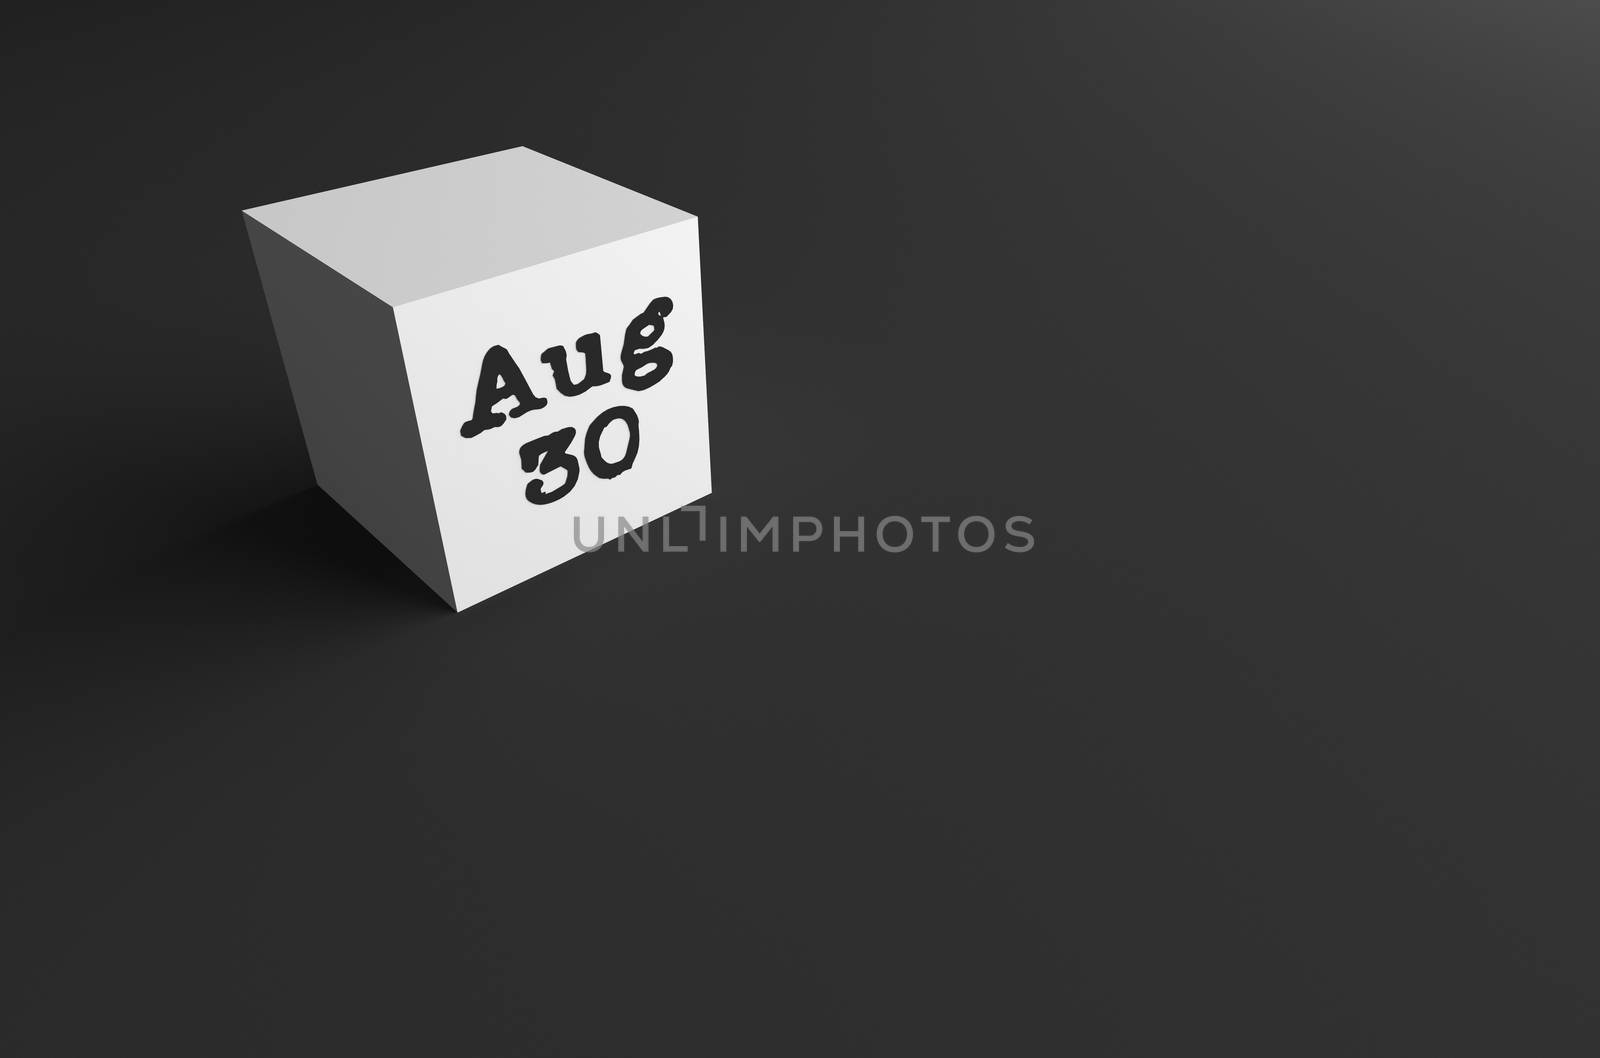 3D RENDERING OF Aug (ABBREVIATION OF AUGUST) 30 ON WHITE CUBE